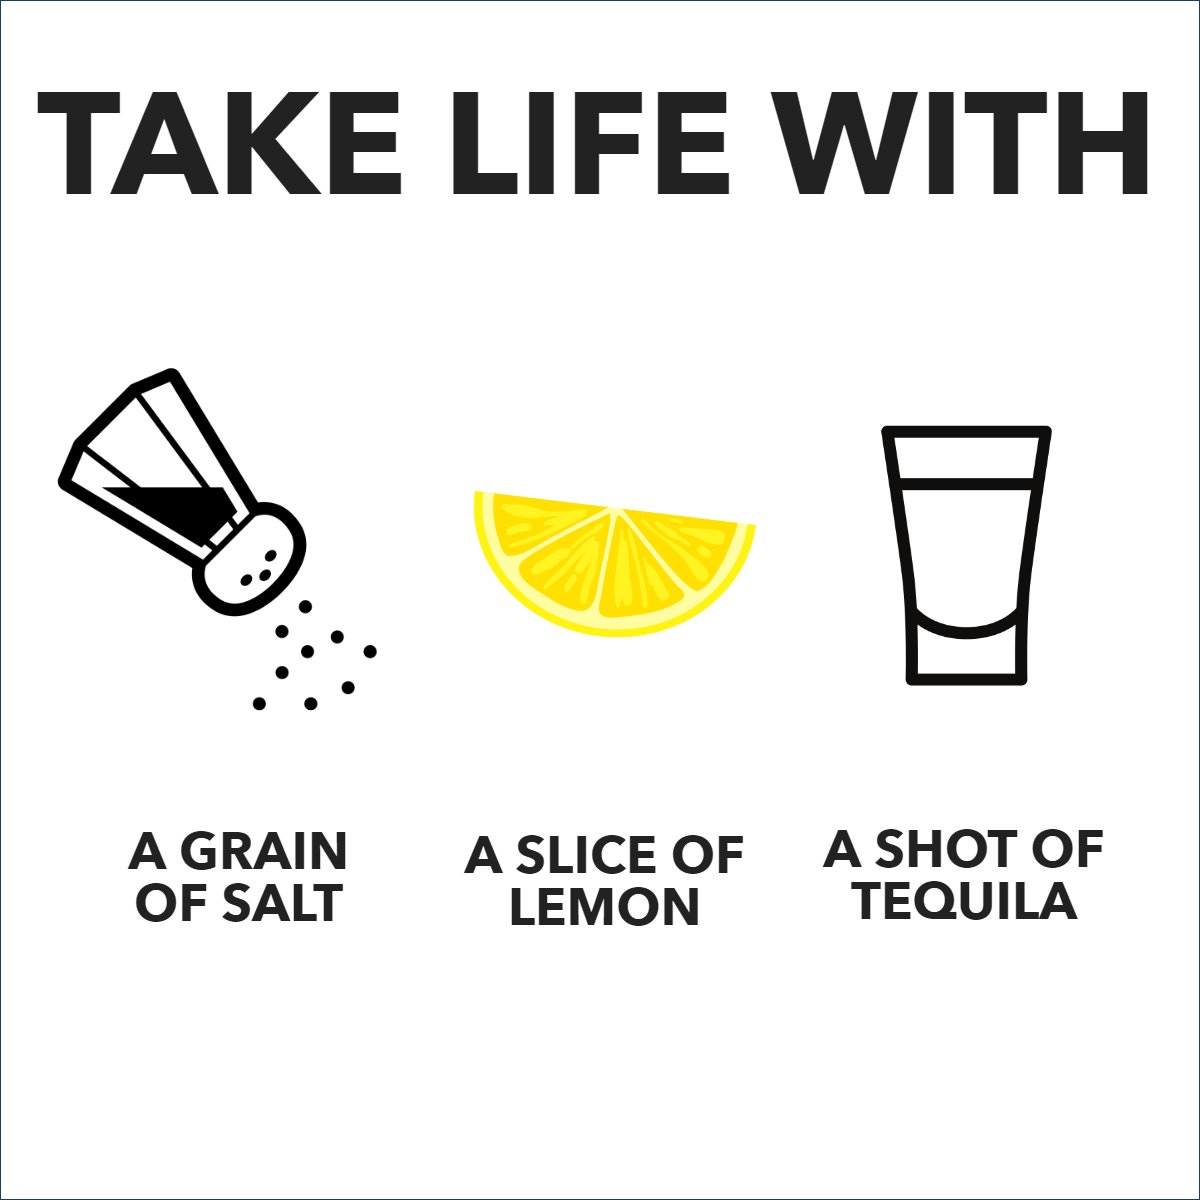 Take life with a grain of salt, a slice of lemon and shot of tequila... 🧂🍋🥃

#lifeisbetteratthebeach    #tequilashots    #makelifebetter    #lemonslice    #tequilashot    #positive    #positivethinking